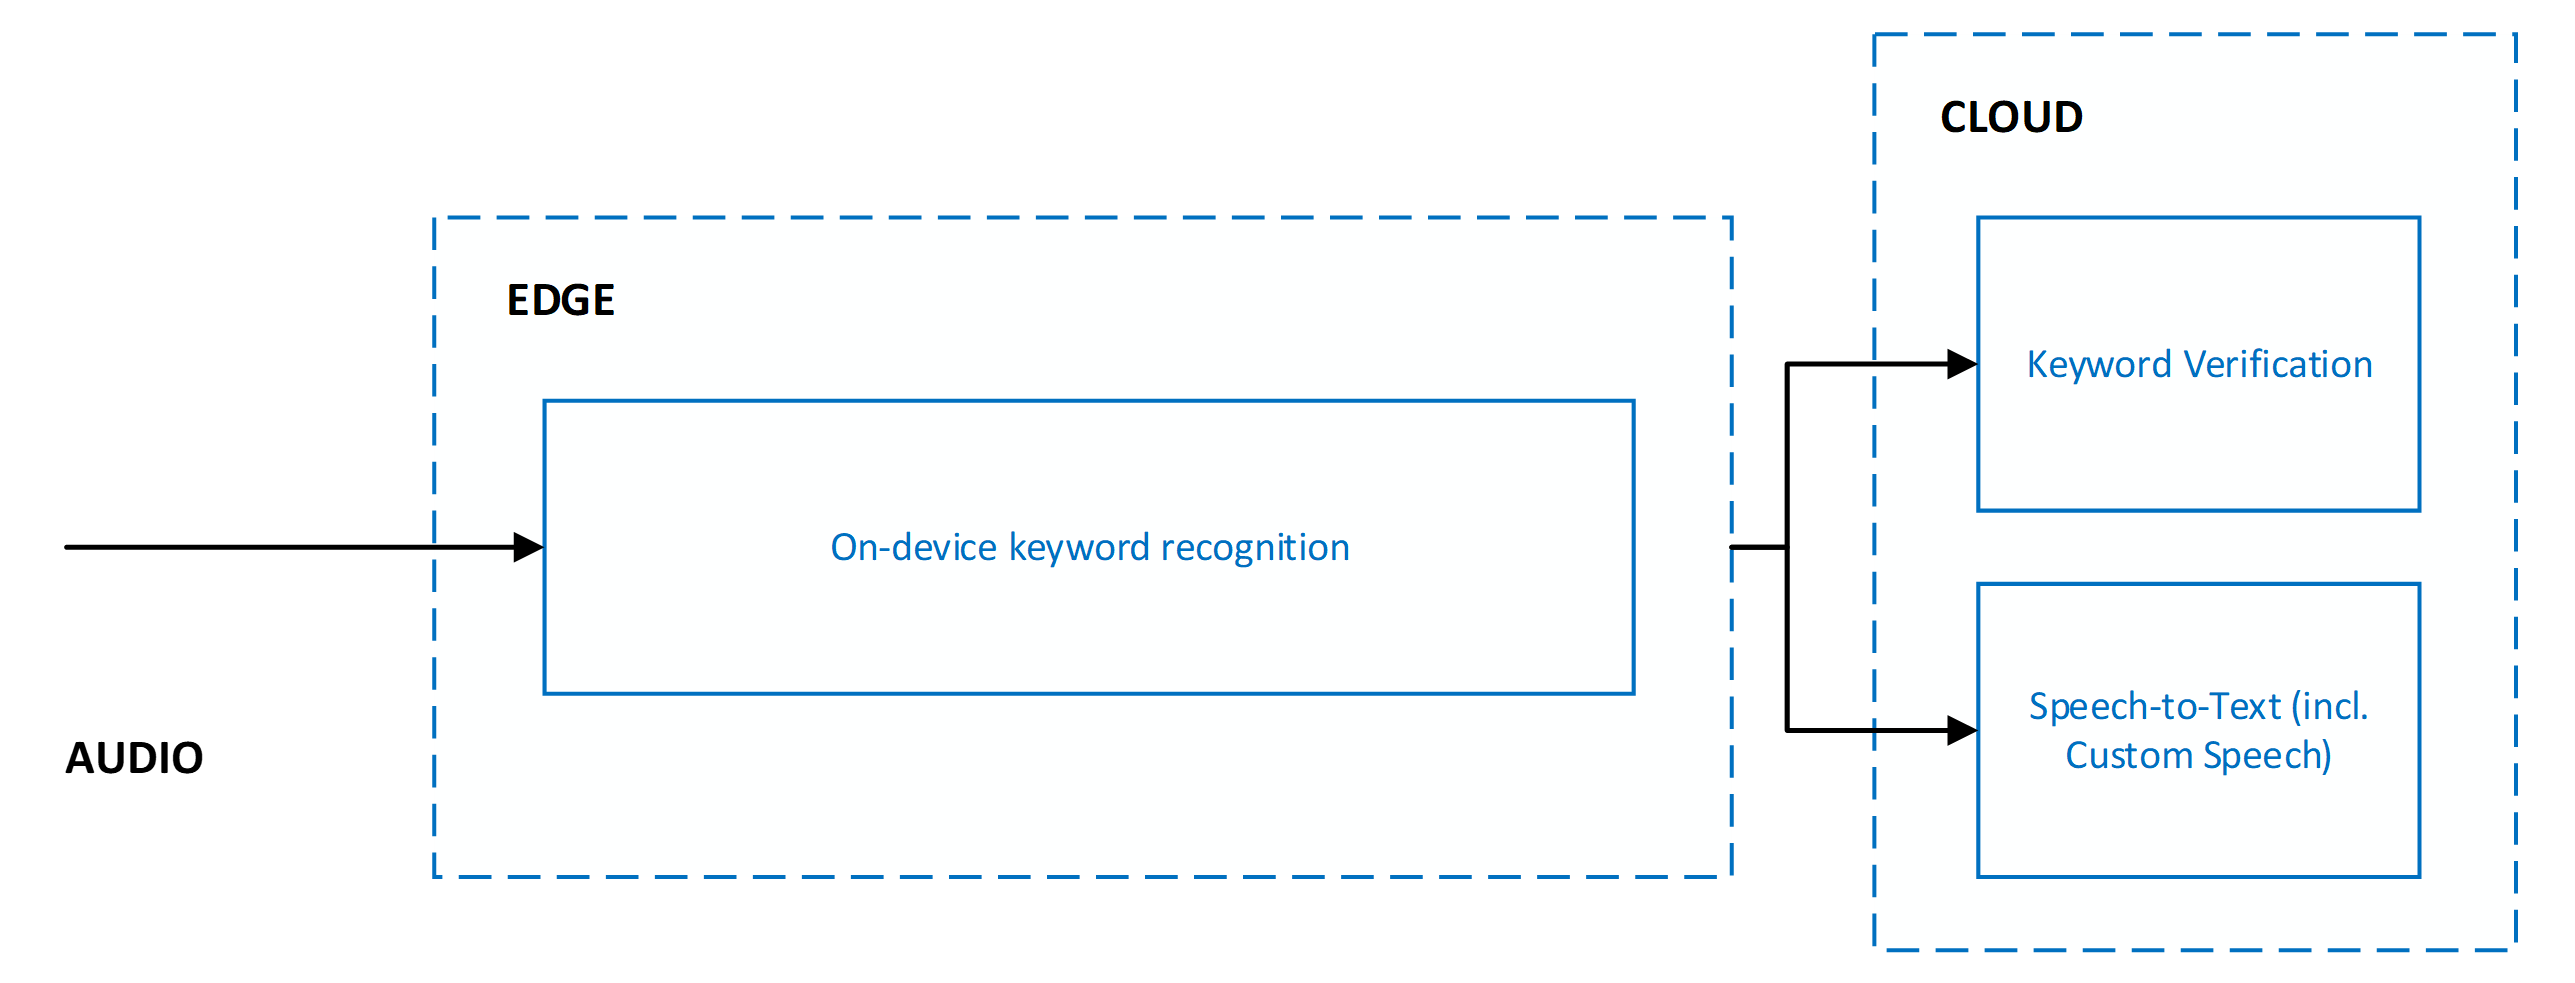 Diagram that shows parallel processing of keyword verification and speech-to-text.